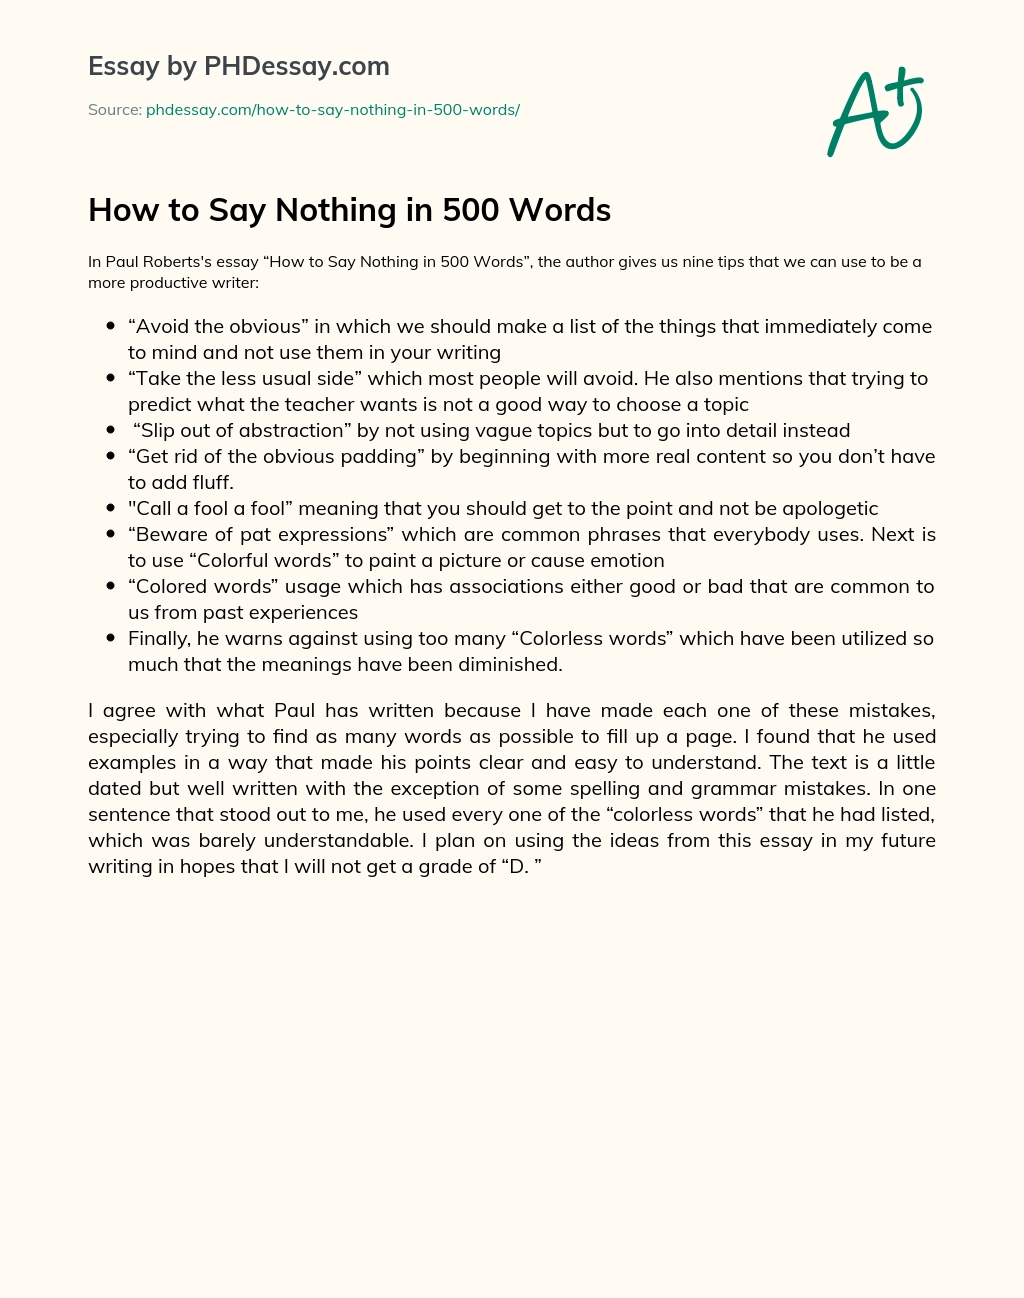 How to Say Nothing in 500 Words essay